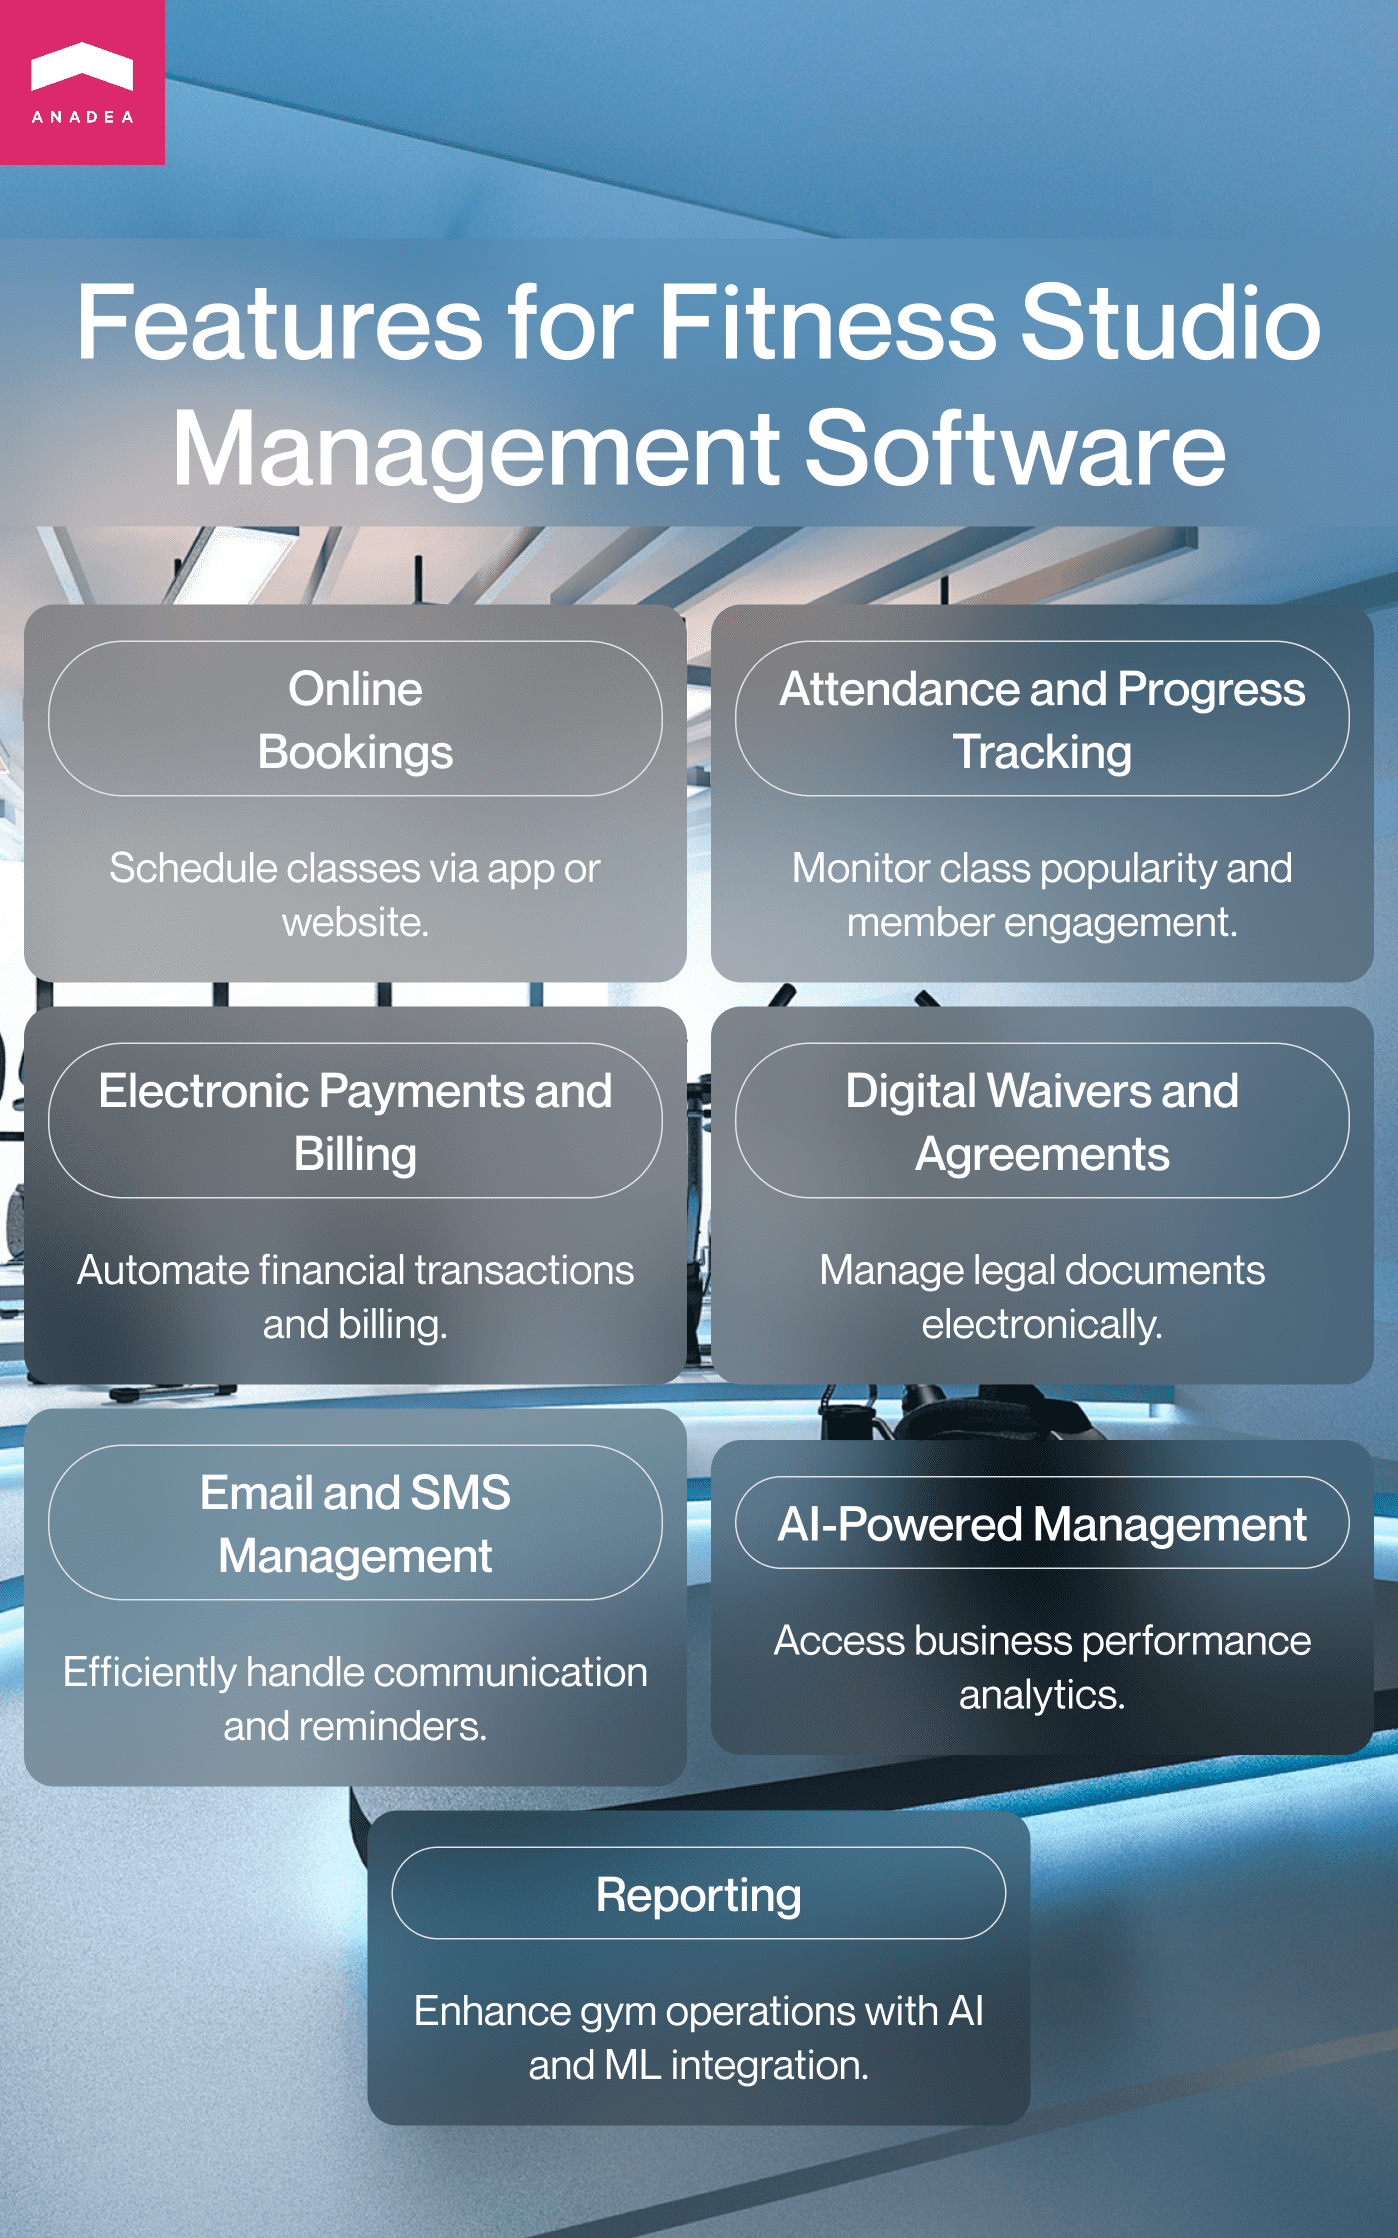 Features for fitness studio management software infographic